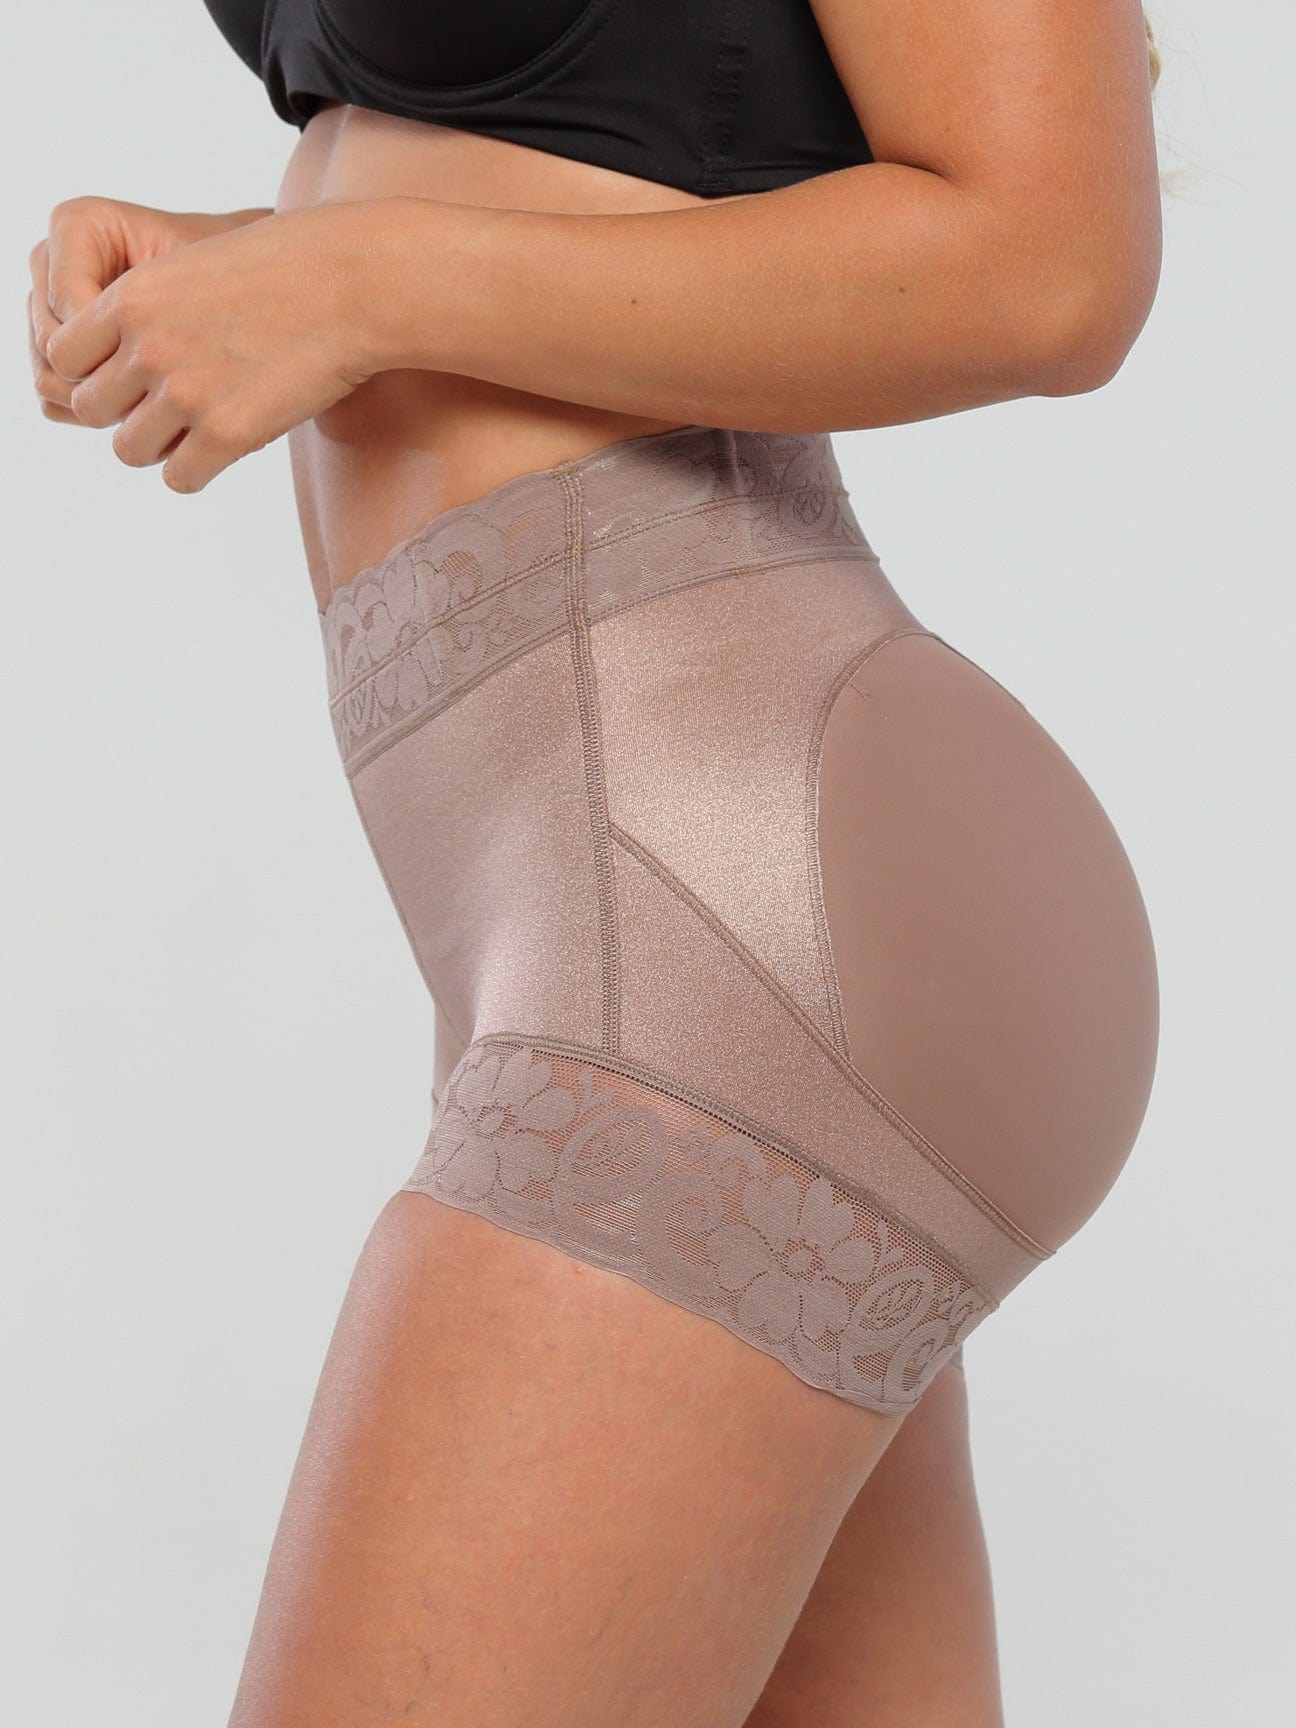 Butt Booty Lifting Shapewear Lifter Panties With Hip Algeria